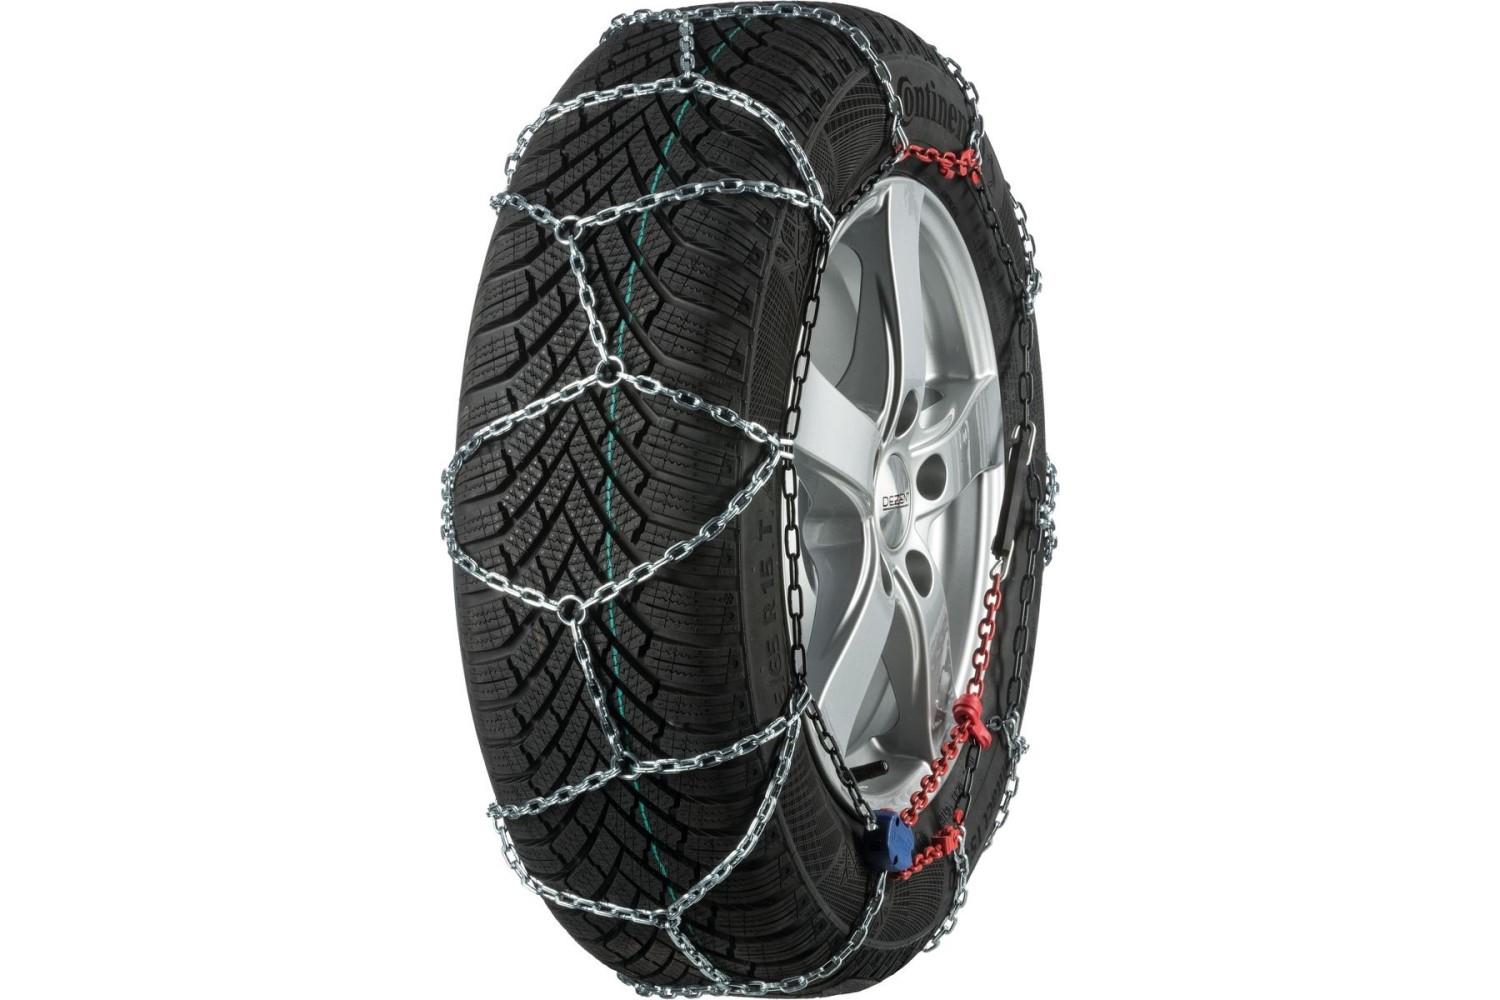 Snow chains 205/60 R16 - Pewag Nordic Star N 73 ST set 2 pieces